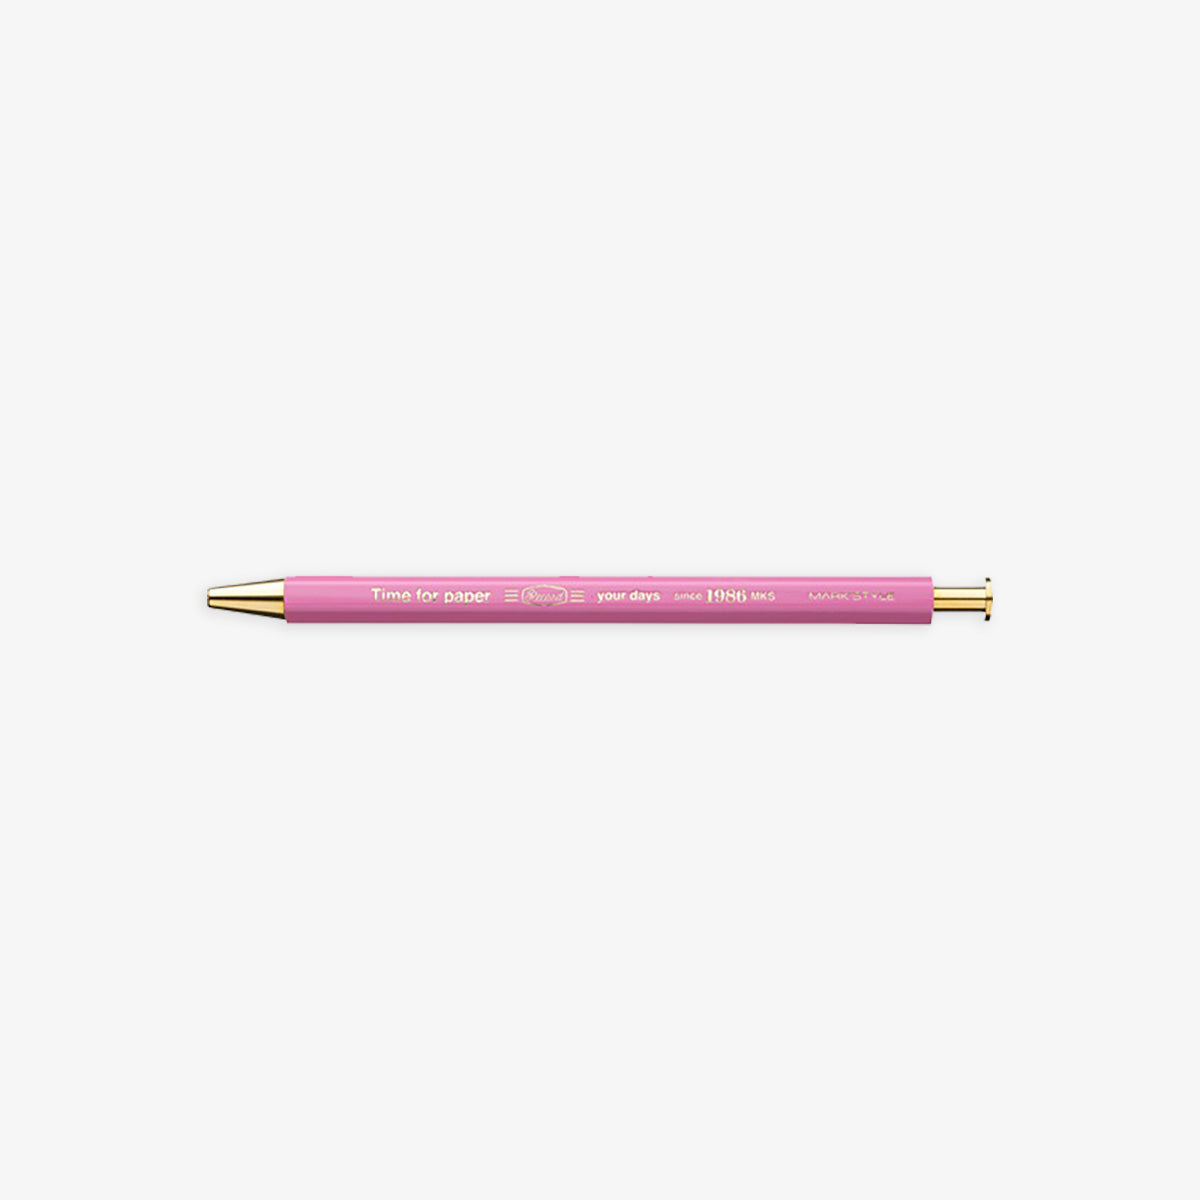 TIME FOR PAPER PENCIL BALL GEL PEN 0.5mm // CHERRY PINK